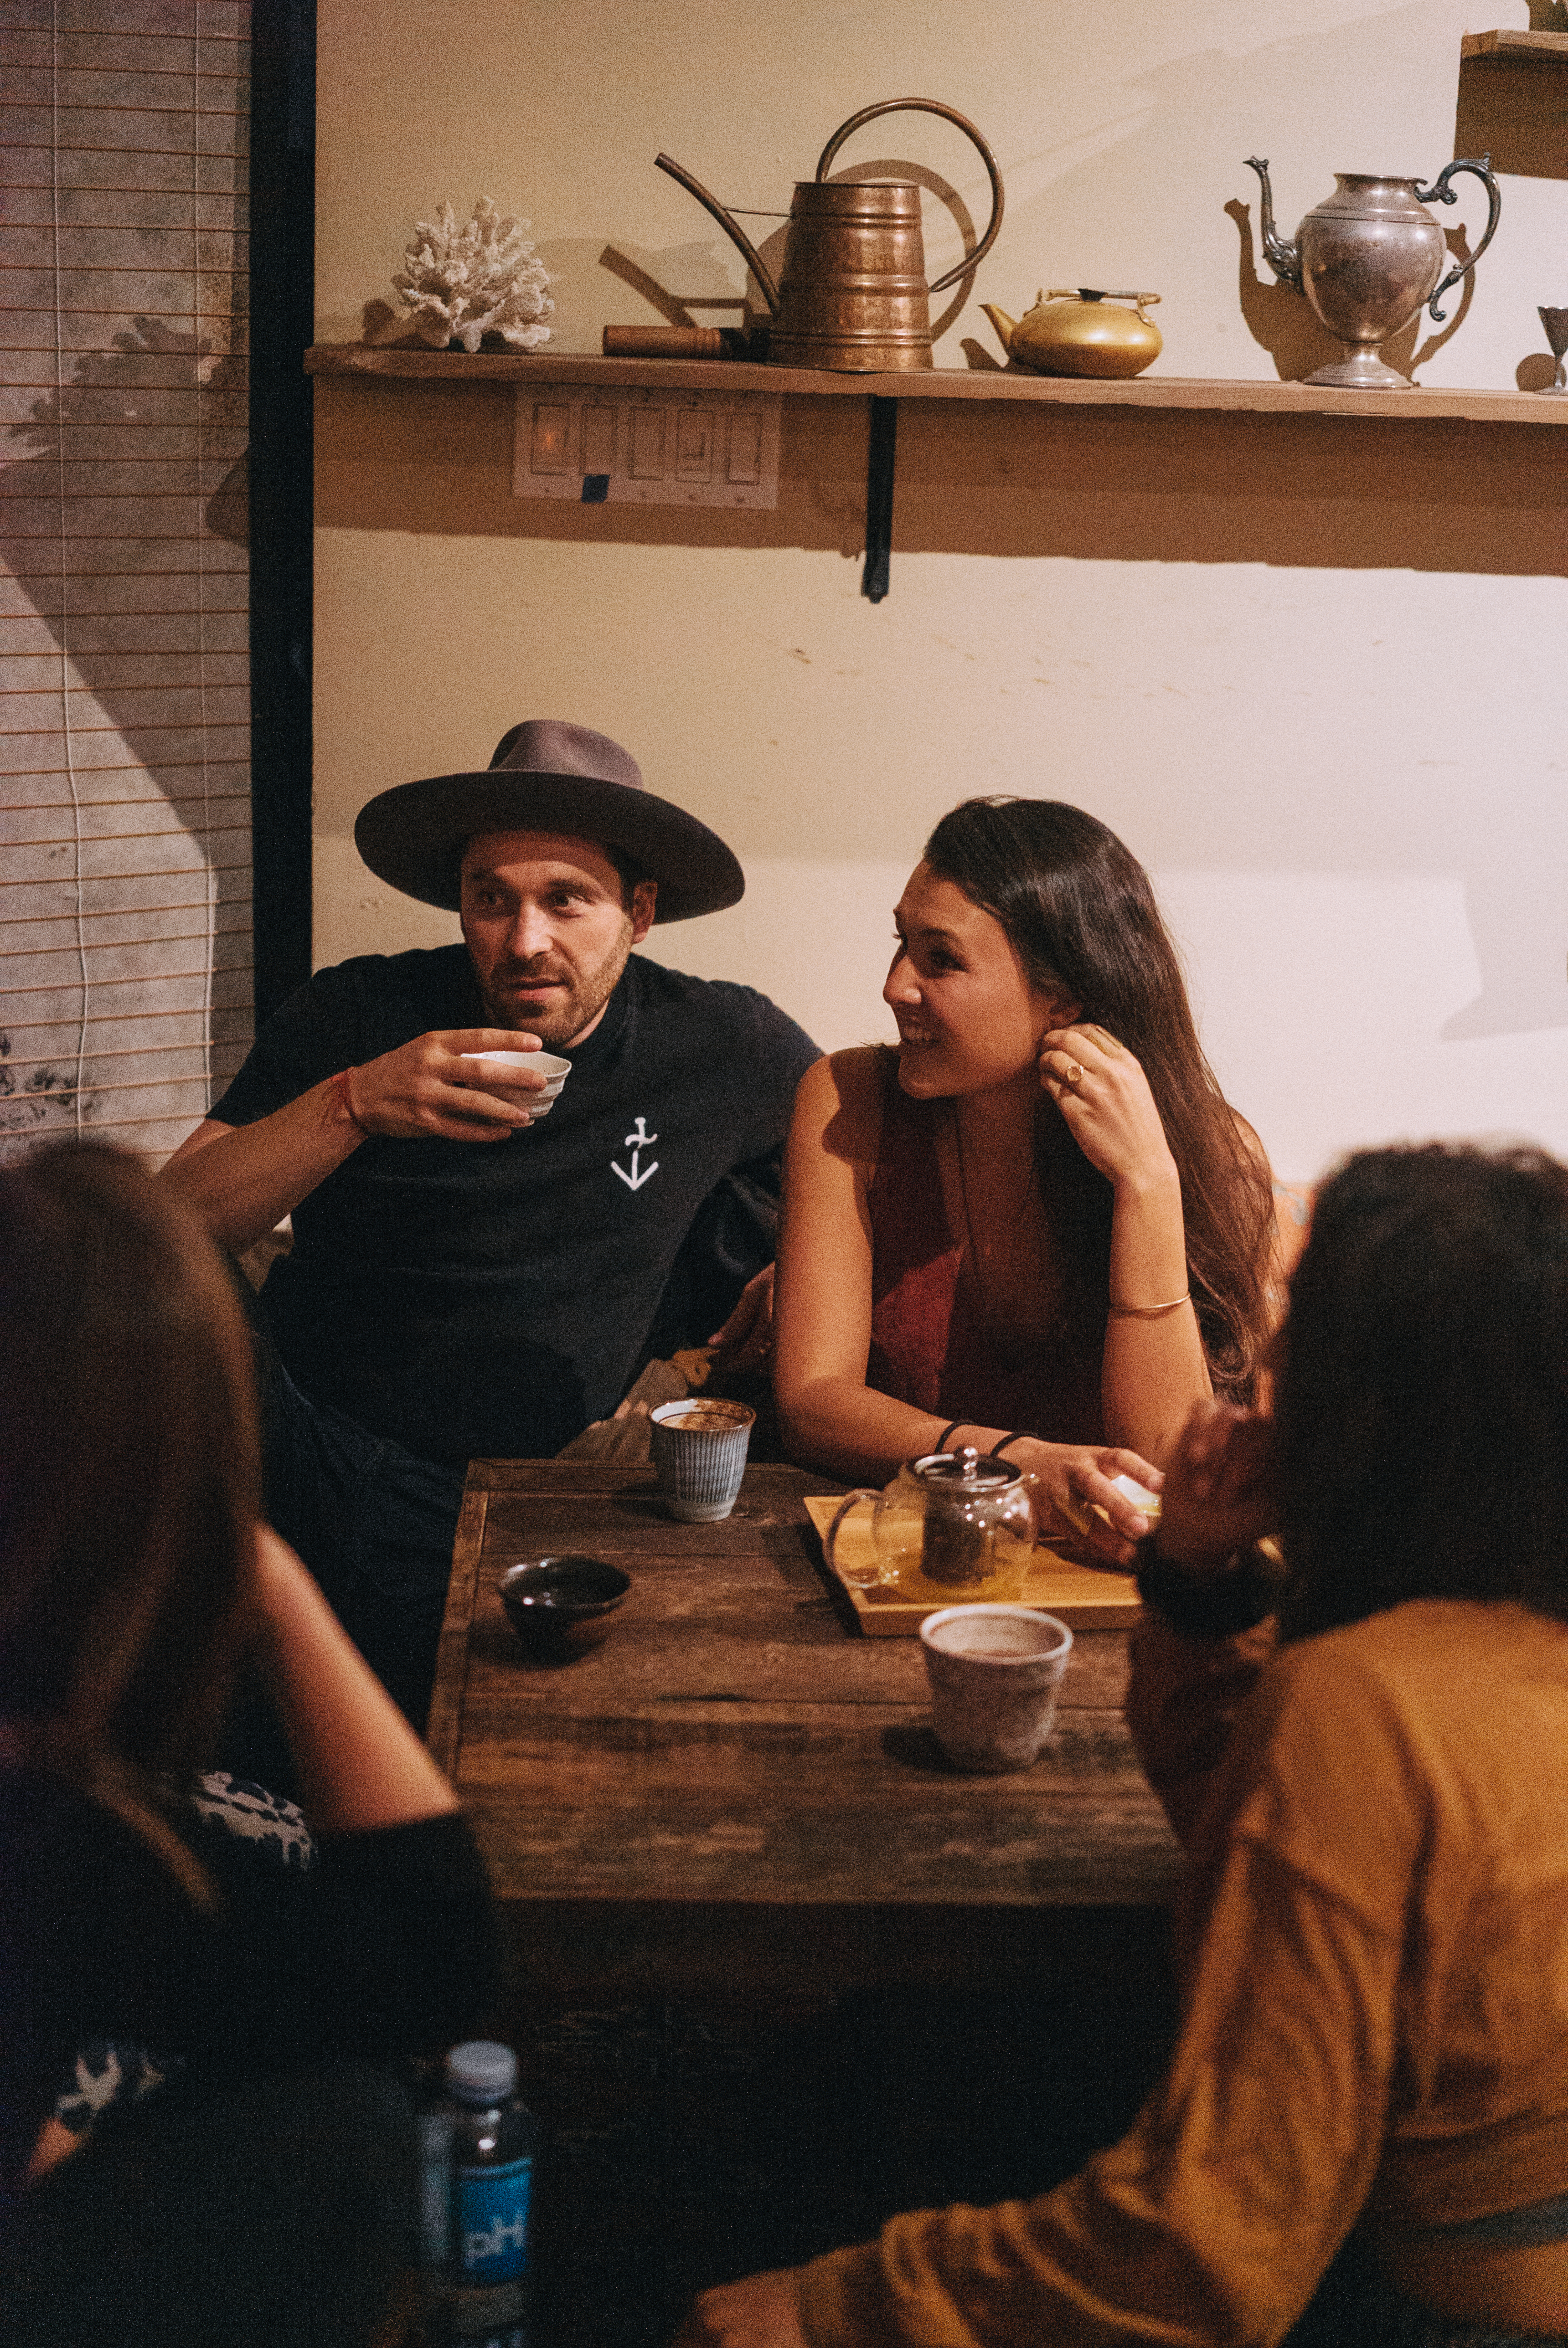 Four people sit around a wooden table with tea cups and a teapot, engaged in conversation. One man wears a hat and drinks from a cup, while a woman smiles beside him.